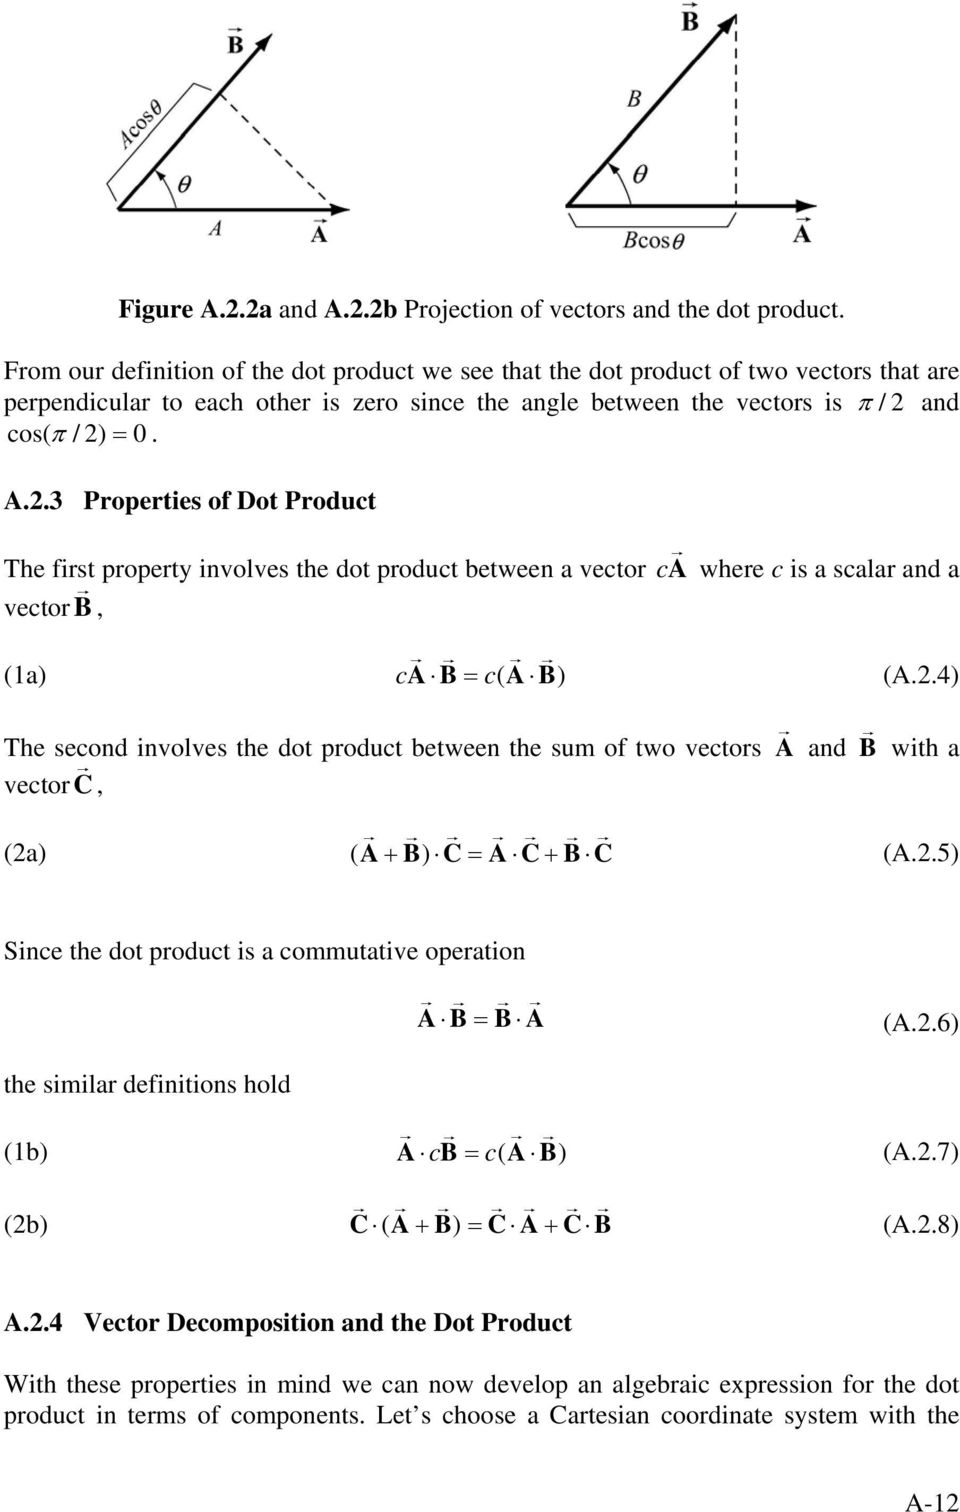 and cos( π / 2) = 0. A.2.3 Properties of Dot Product The first property involves the dot product between a vector ca where c is a scalar and a vector B, (1a) ca B = c ( A B) (A.2.4) The second involves the dot product between the sum of two vectors vectorc, (2a) ( A+ B) C= A C+ B C A and B with a (A.